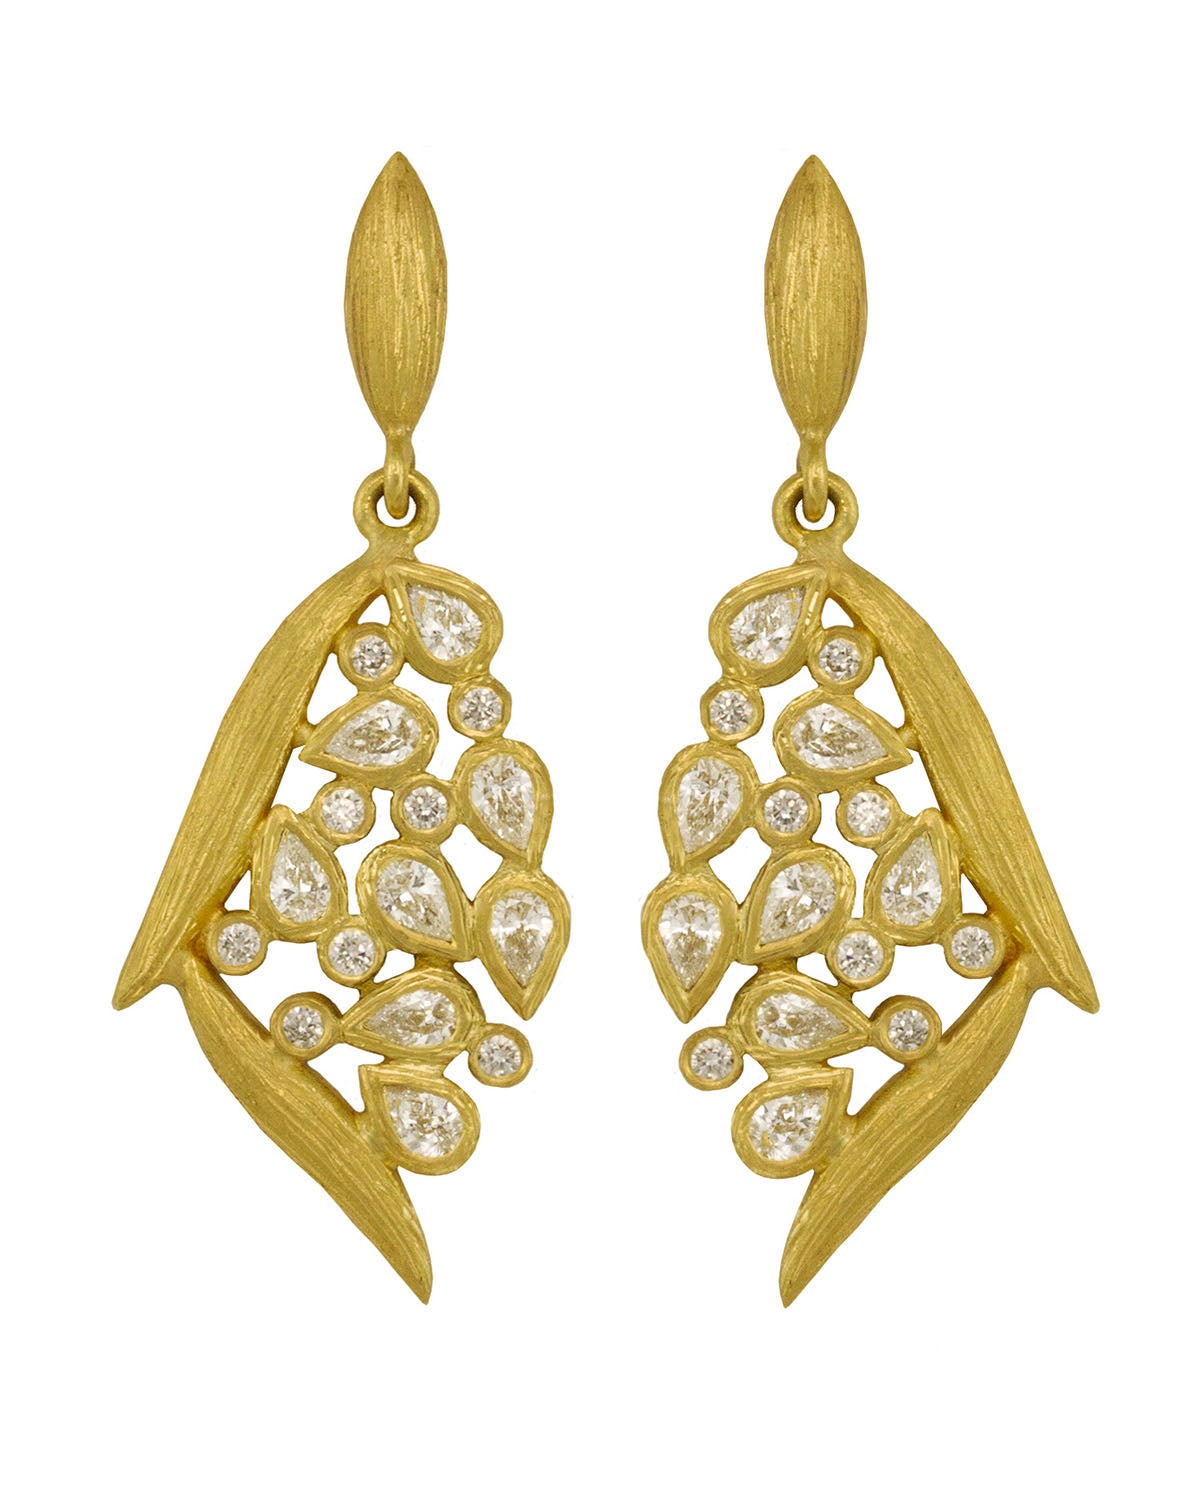 Diamond Leaf and Vine Drop Earring by Laurie Kaiser available at Talisman Collection Fine Jewelers in El Dorado Hills, CA and online. Delight in our 18k gold Diamond Leaf and Vine Drop  Earrings, featuring 0.69 cts of pear-cut diamonds and 0.16 cts of round brilliant diamonds, elegantly nestled between two delicately textured leaves. Enjoy the classic post-back design for both ease and style. These earrings epitomize understated sophistication.